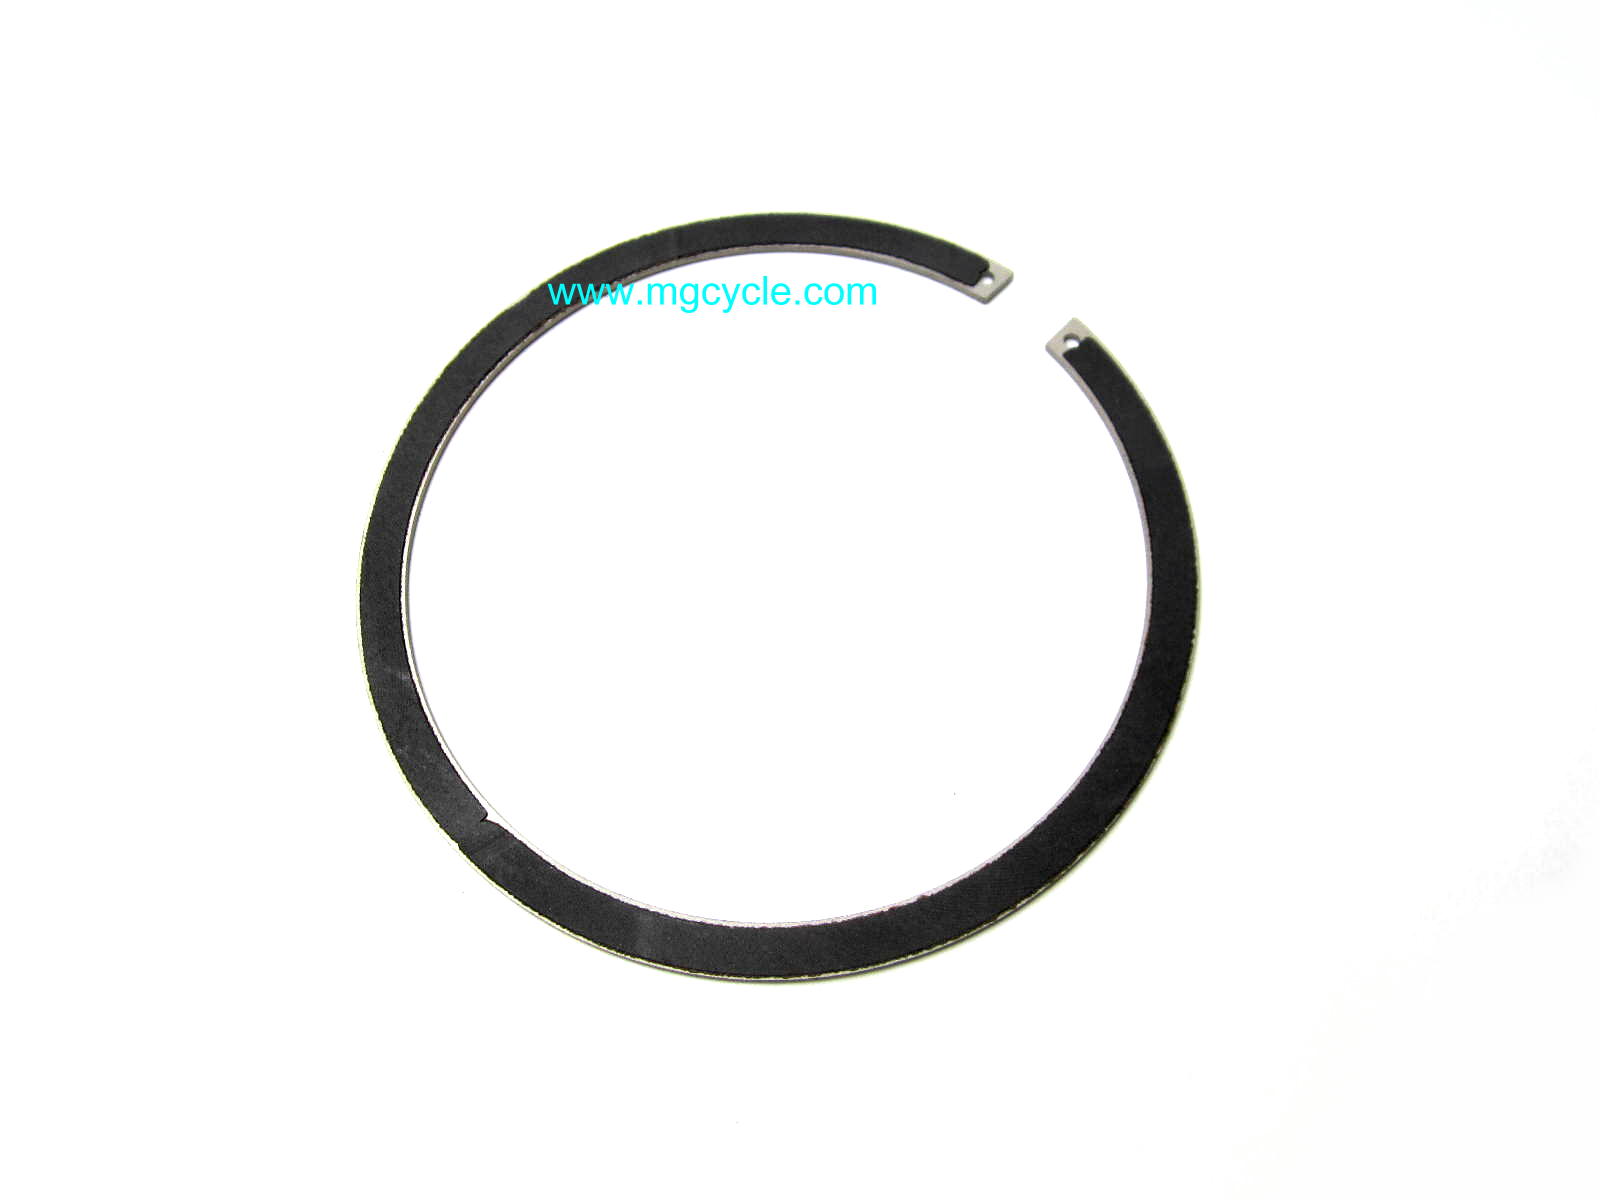 Cush drive plate snap ring with friction lining